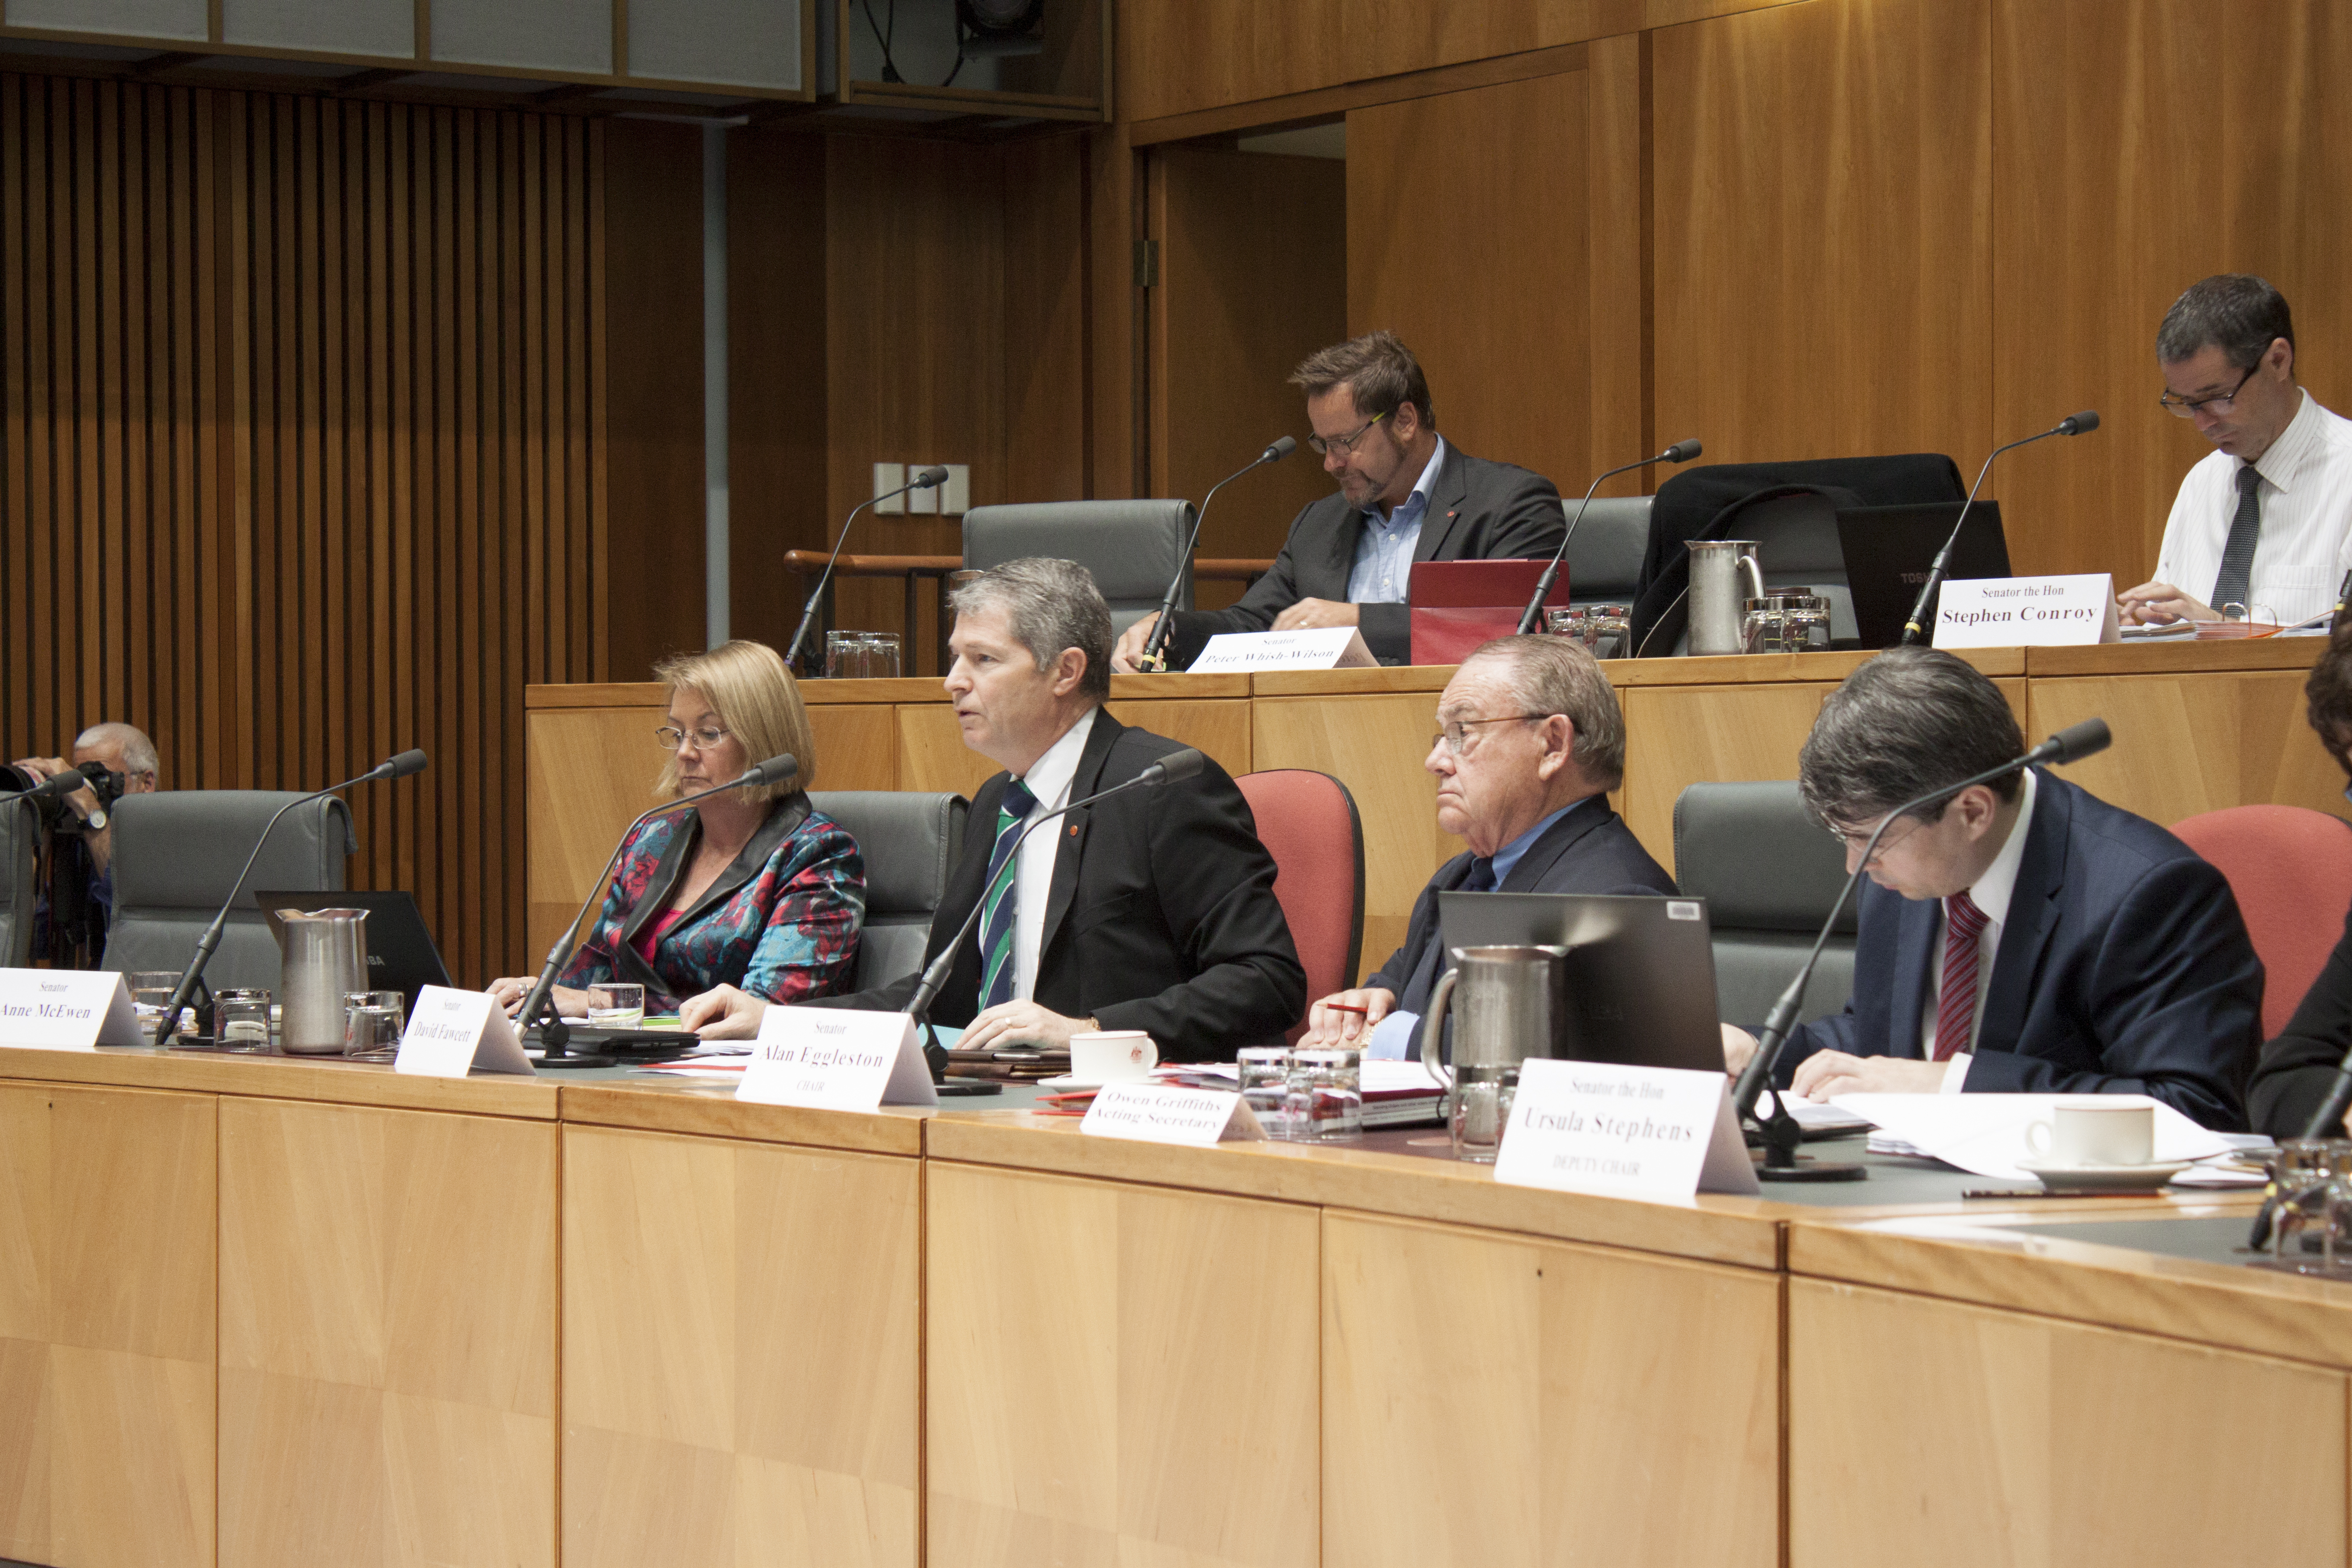 Foreign Affairs, Defence and Trade Legislation Committee budget estimates hearing, 2 June 2014. Top row L-R: Senators Peter Whish-Wilson and Stephen Conroy. Bottom row L-R: Senators Anne McEwen, David Fawcett and Alan Eggleston [Chair], and Owen Griffiths [Acting Secretary].